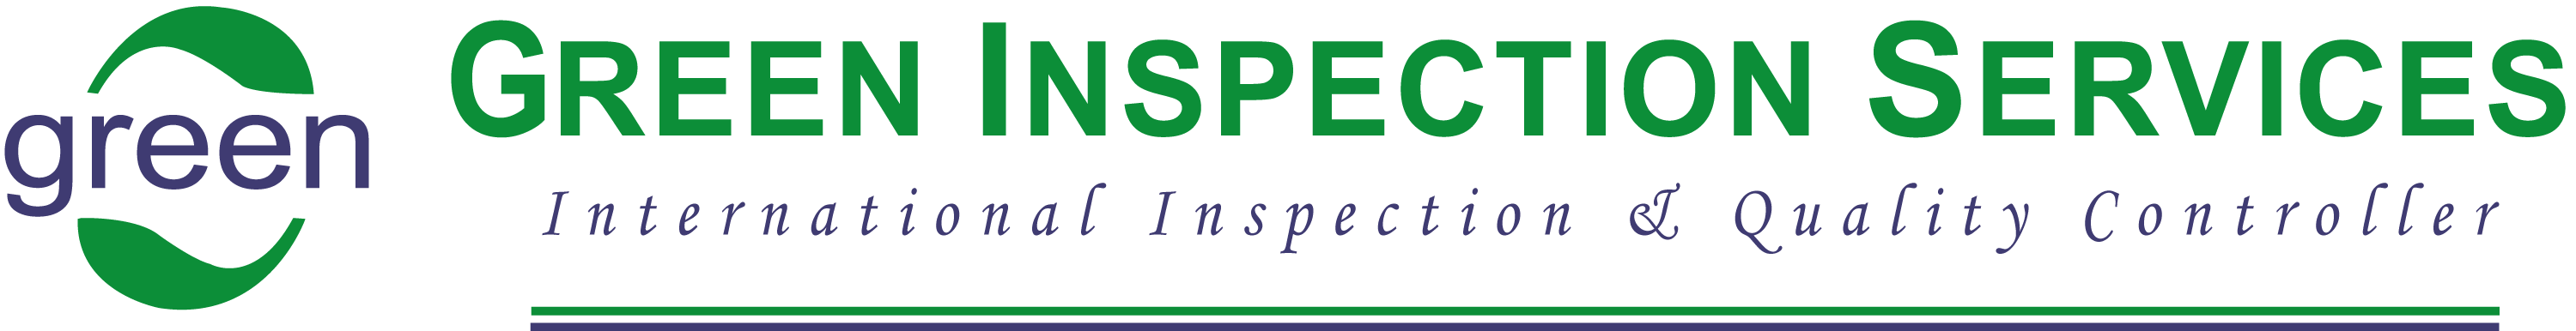 WELCOME TO GREEN INSPECTION SERVICES